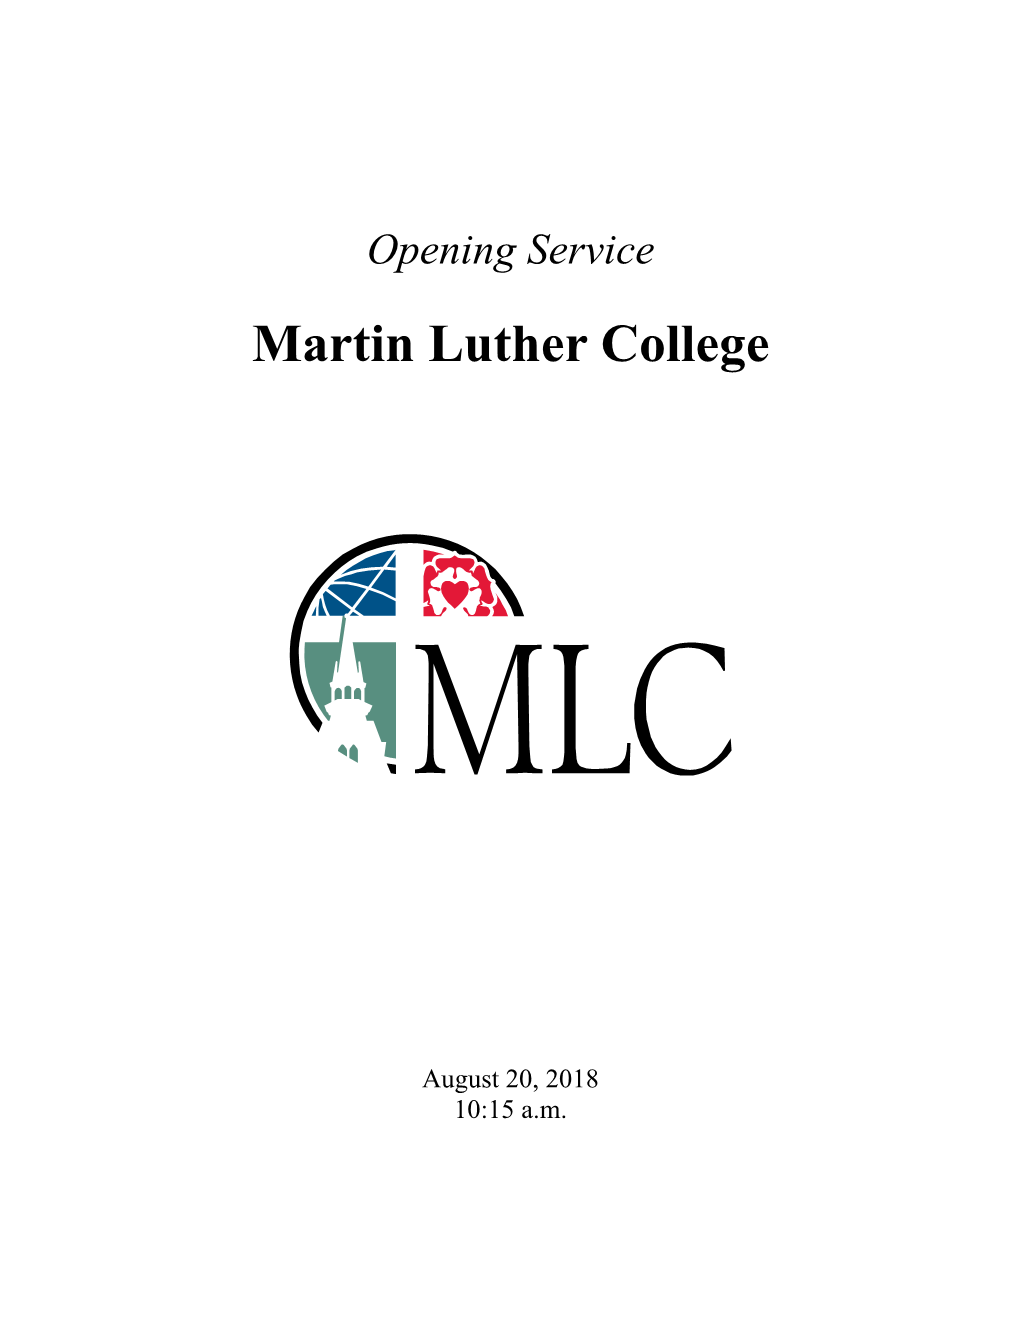 Opening Service Fall 2018